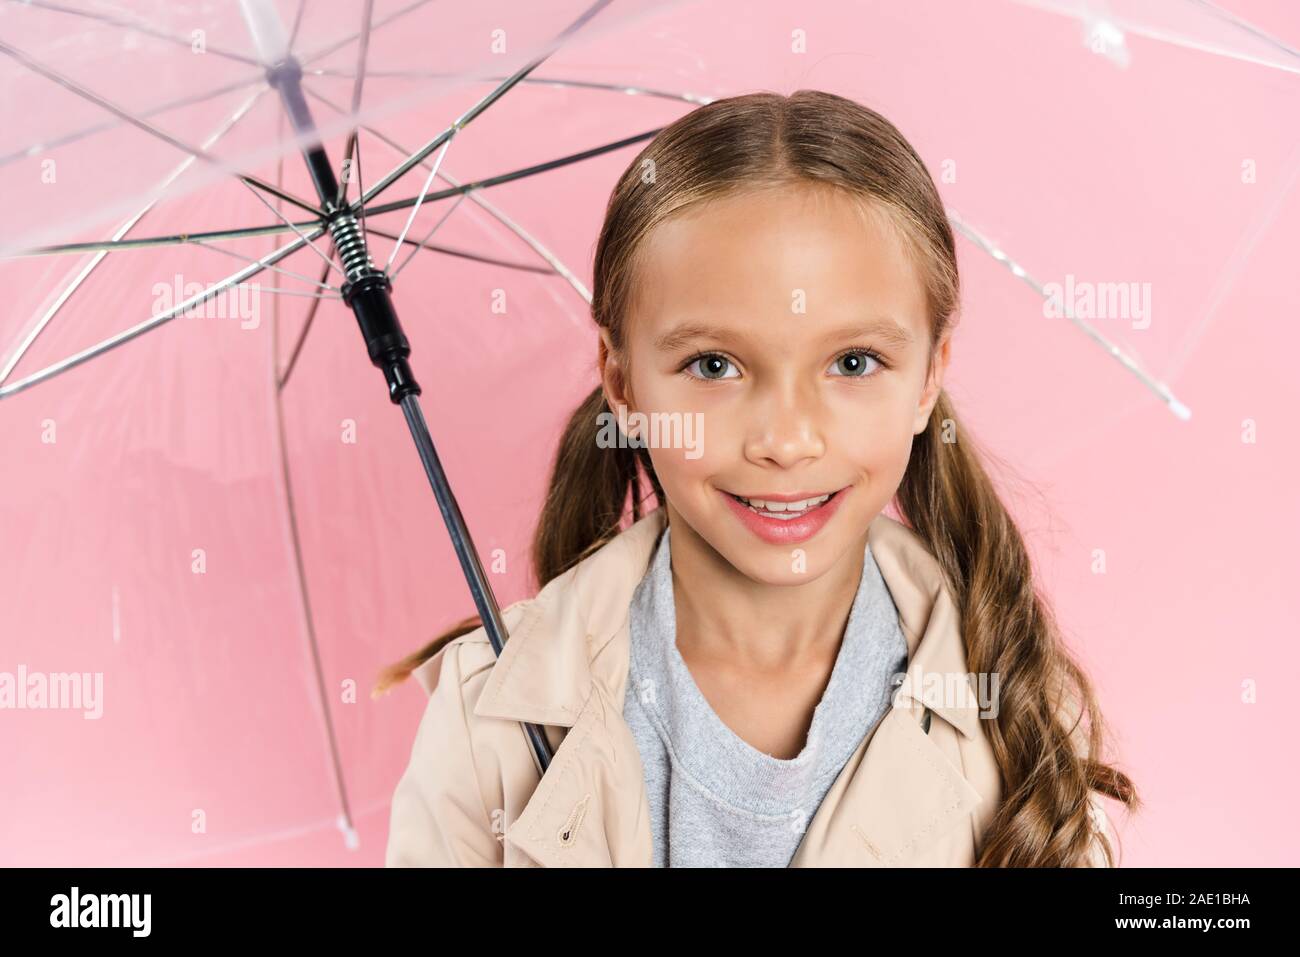 high angle view of smiling kid in autumn outfit holding umbrella isolated on pink Stock Photo